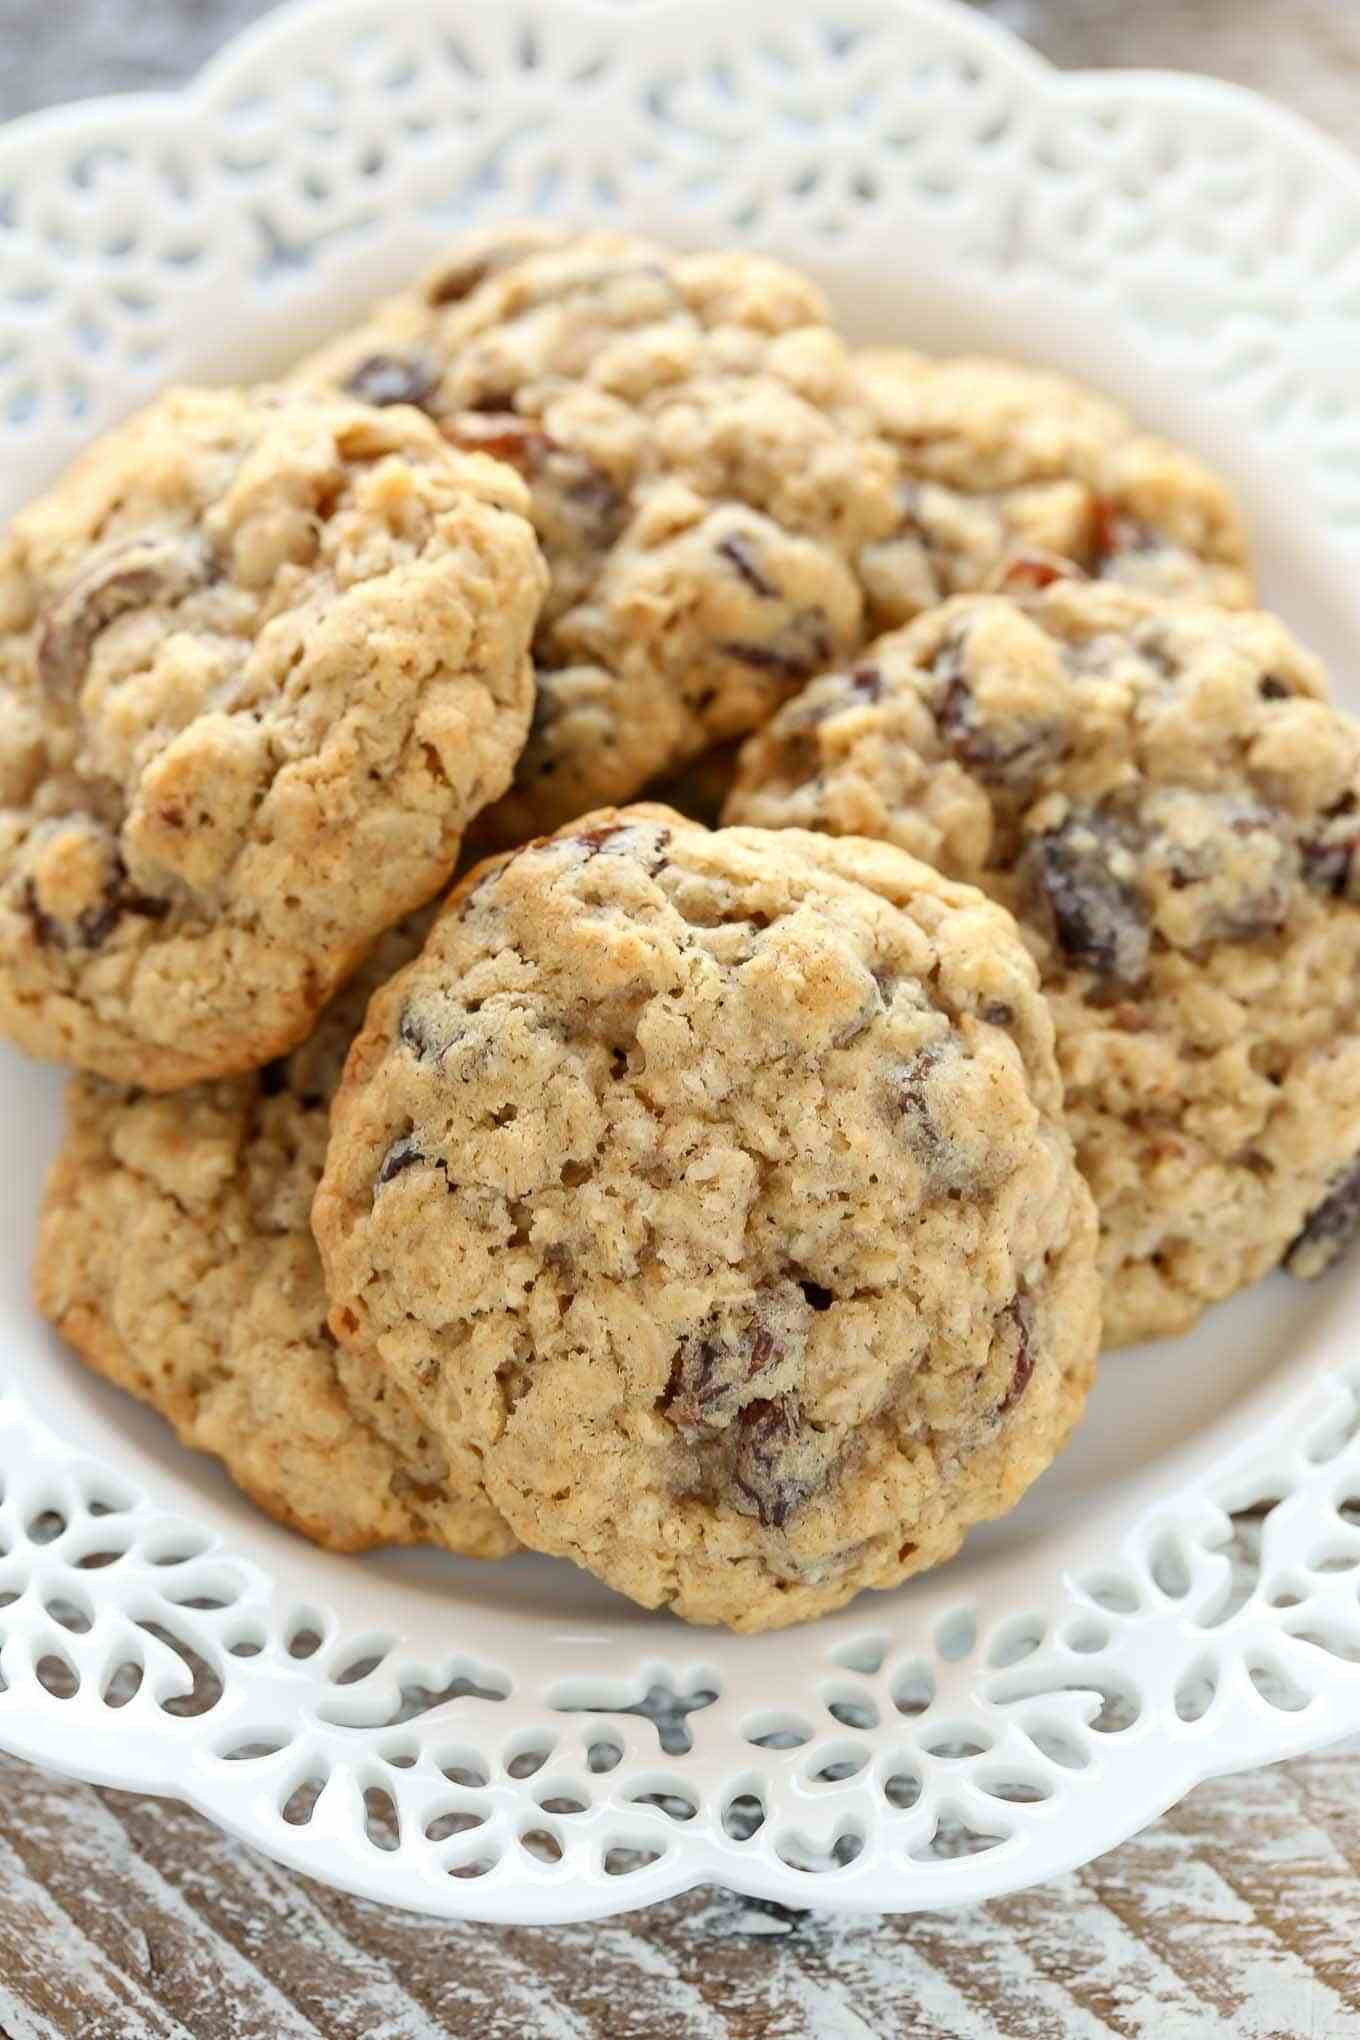 Recipes For Oatmeal Cookies
 Soft and Chewy Oatmeal Raisin Cookies